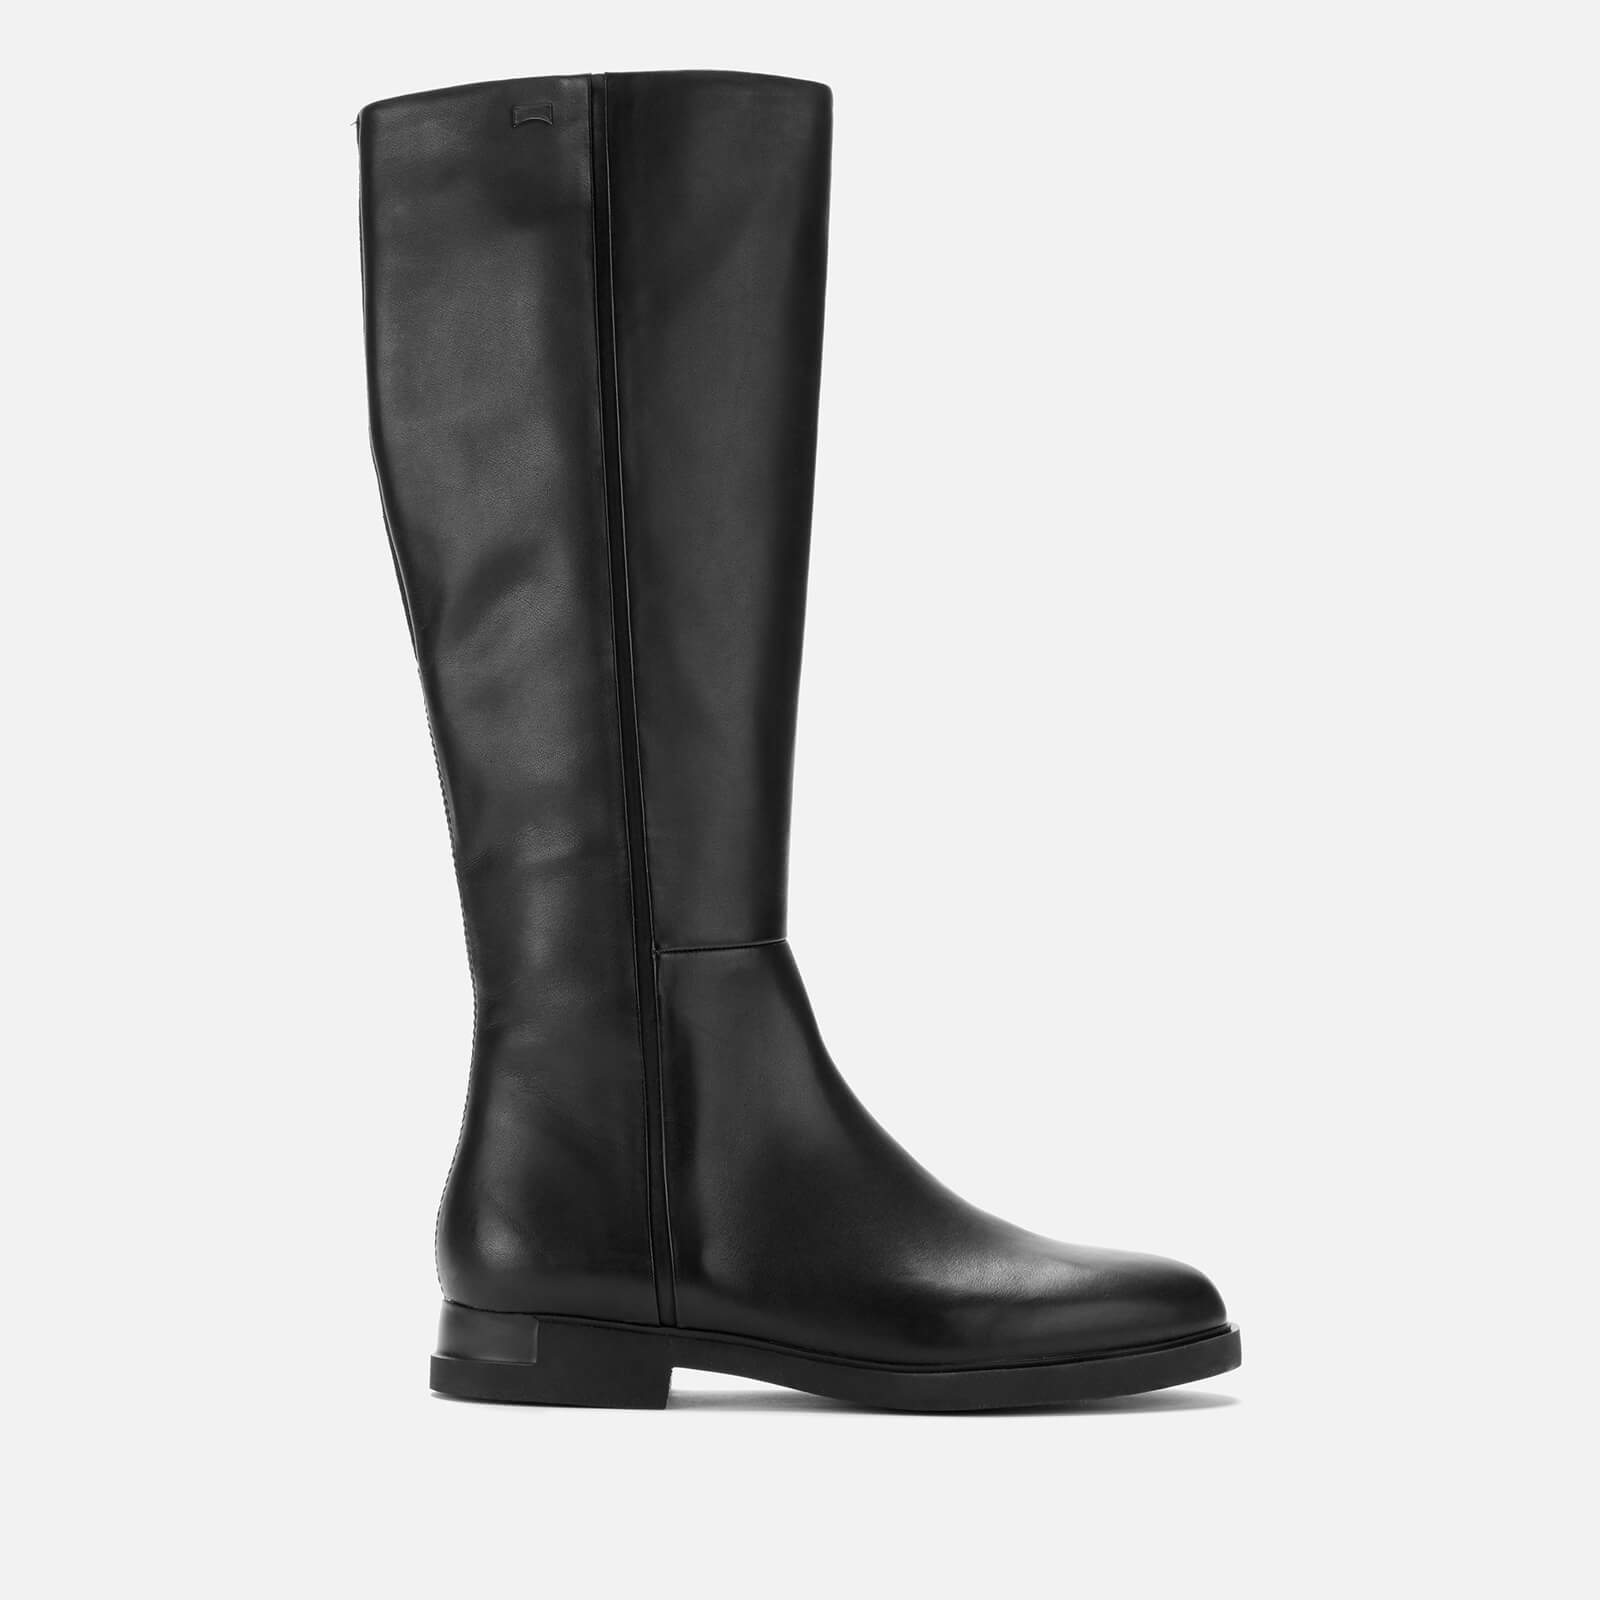 Camper Women's Iman Leather Knee High Boots - Black